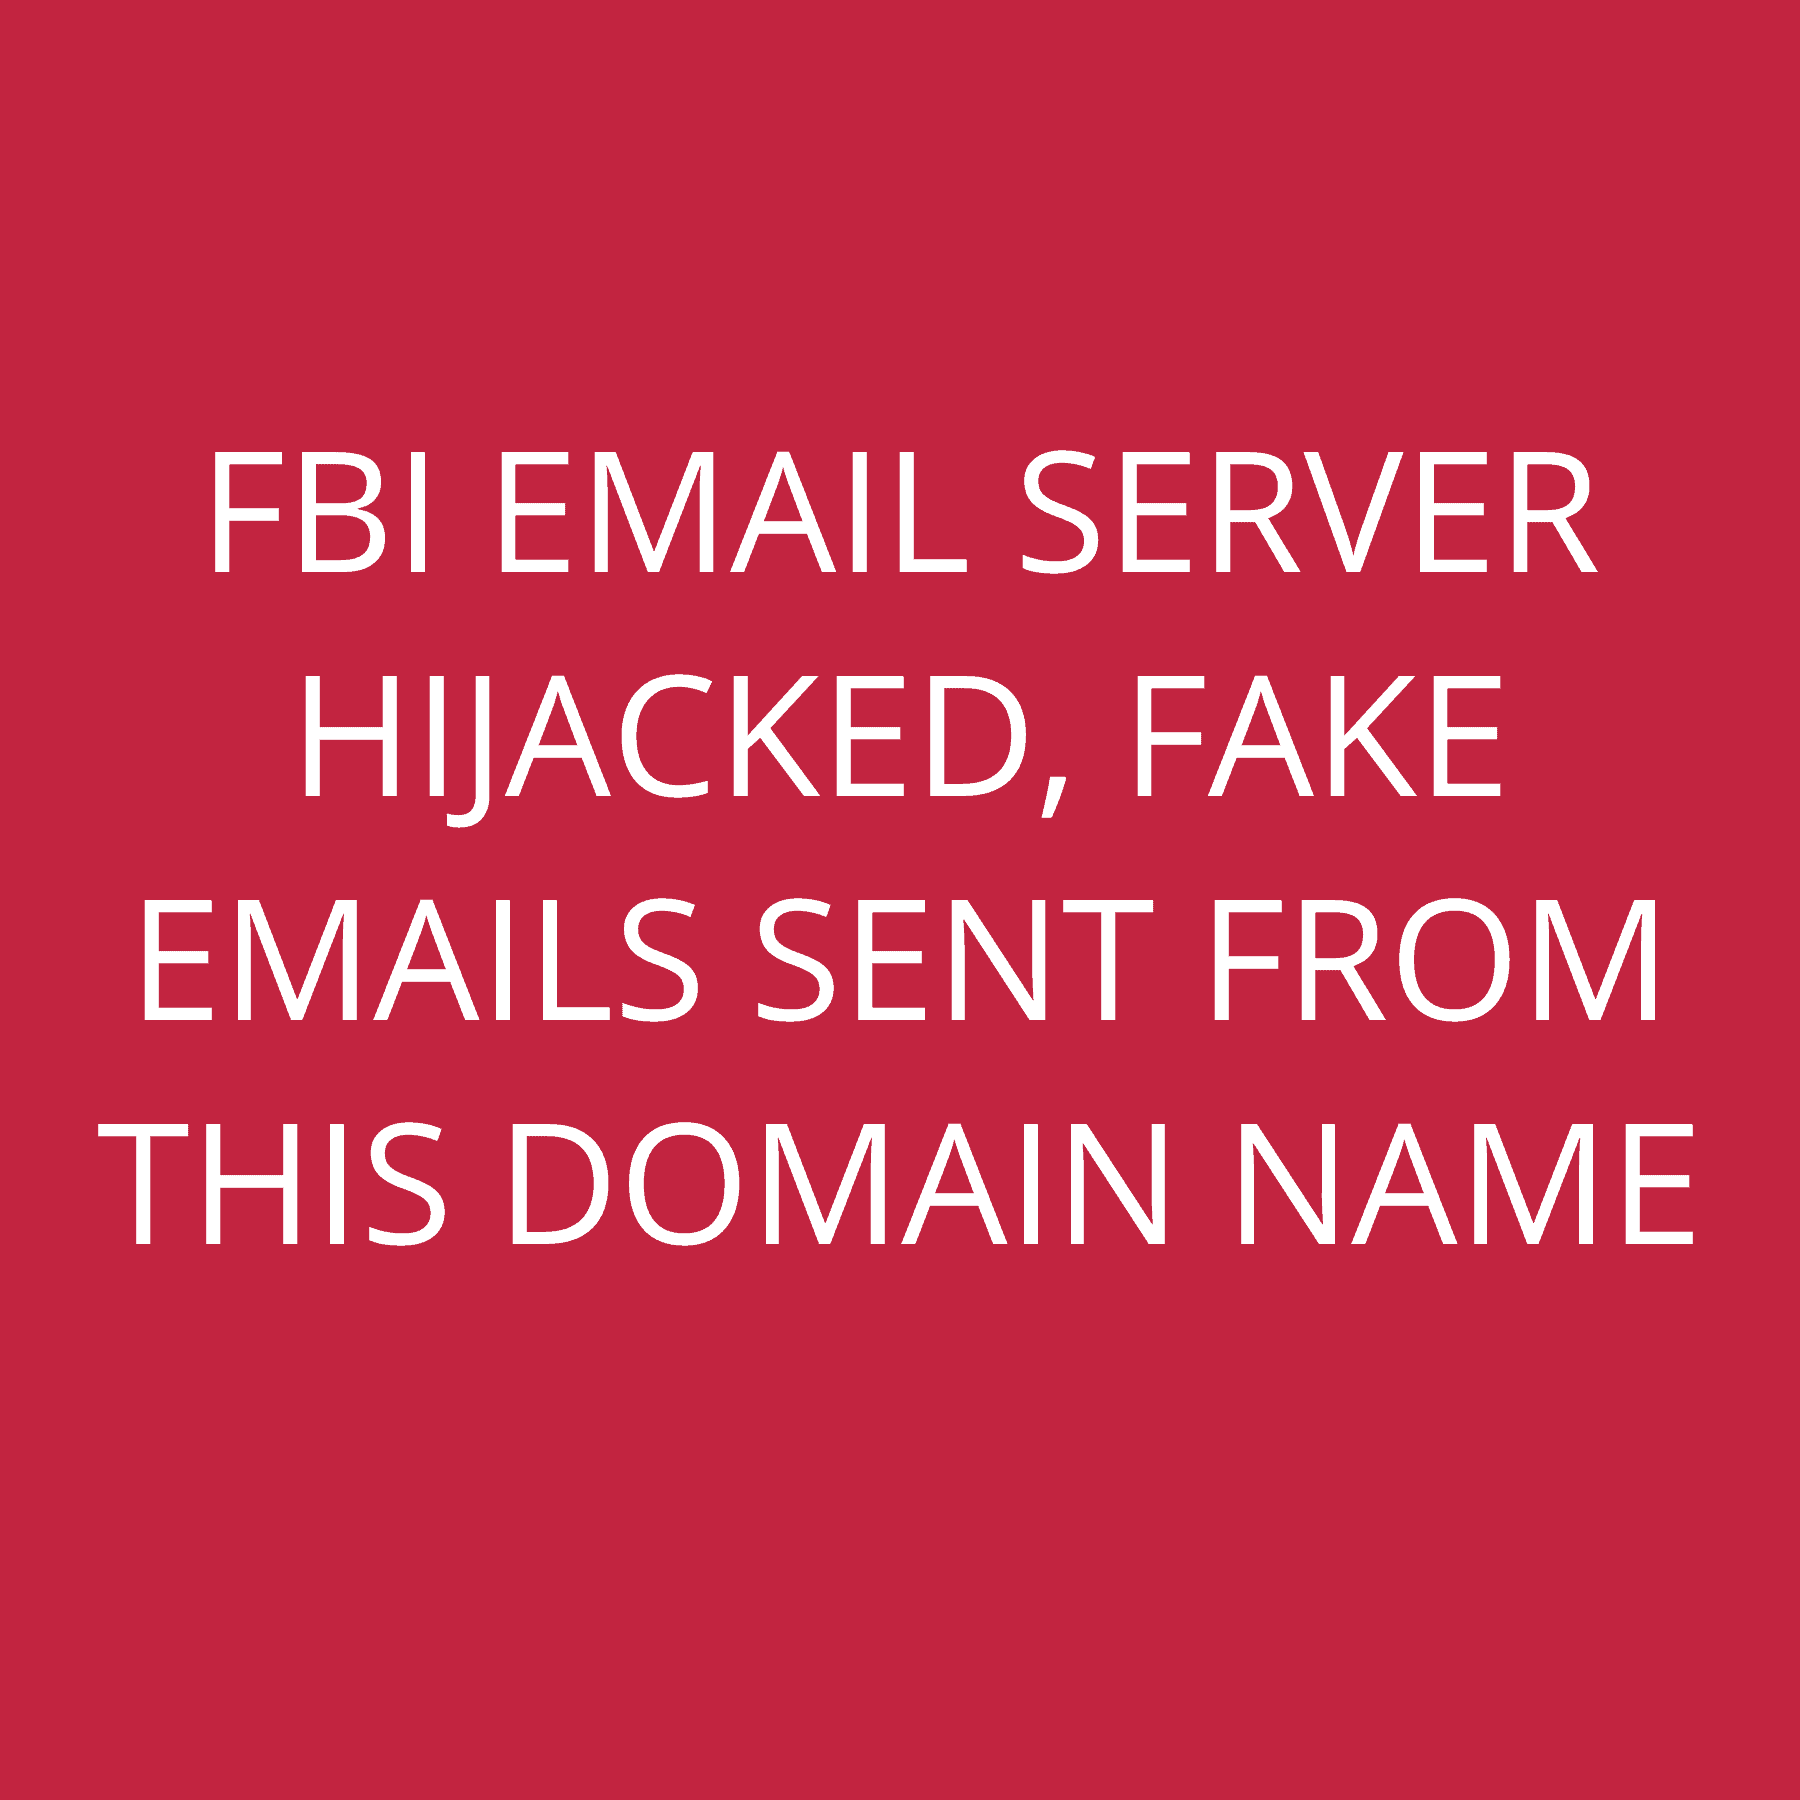 FBI email server hijacked, fake emails sent from this domain name